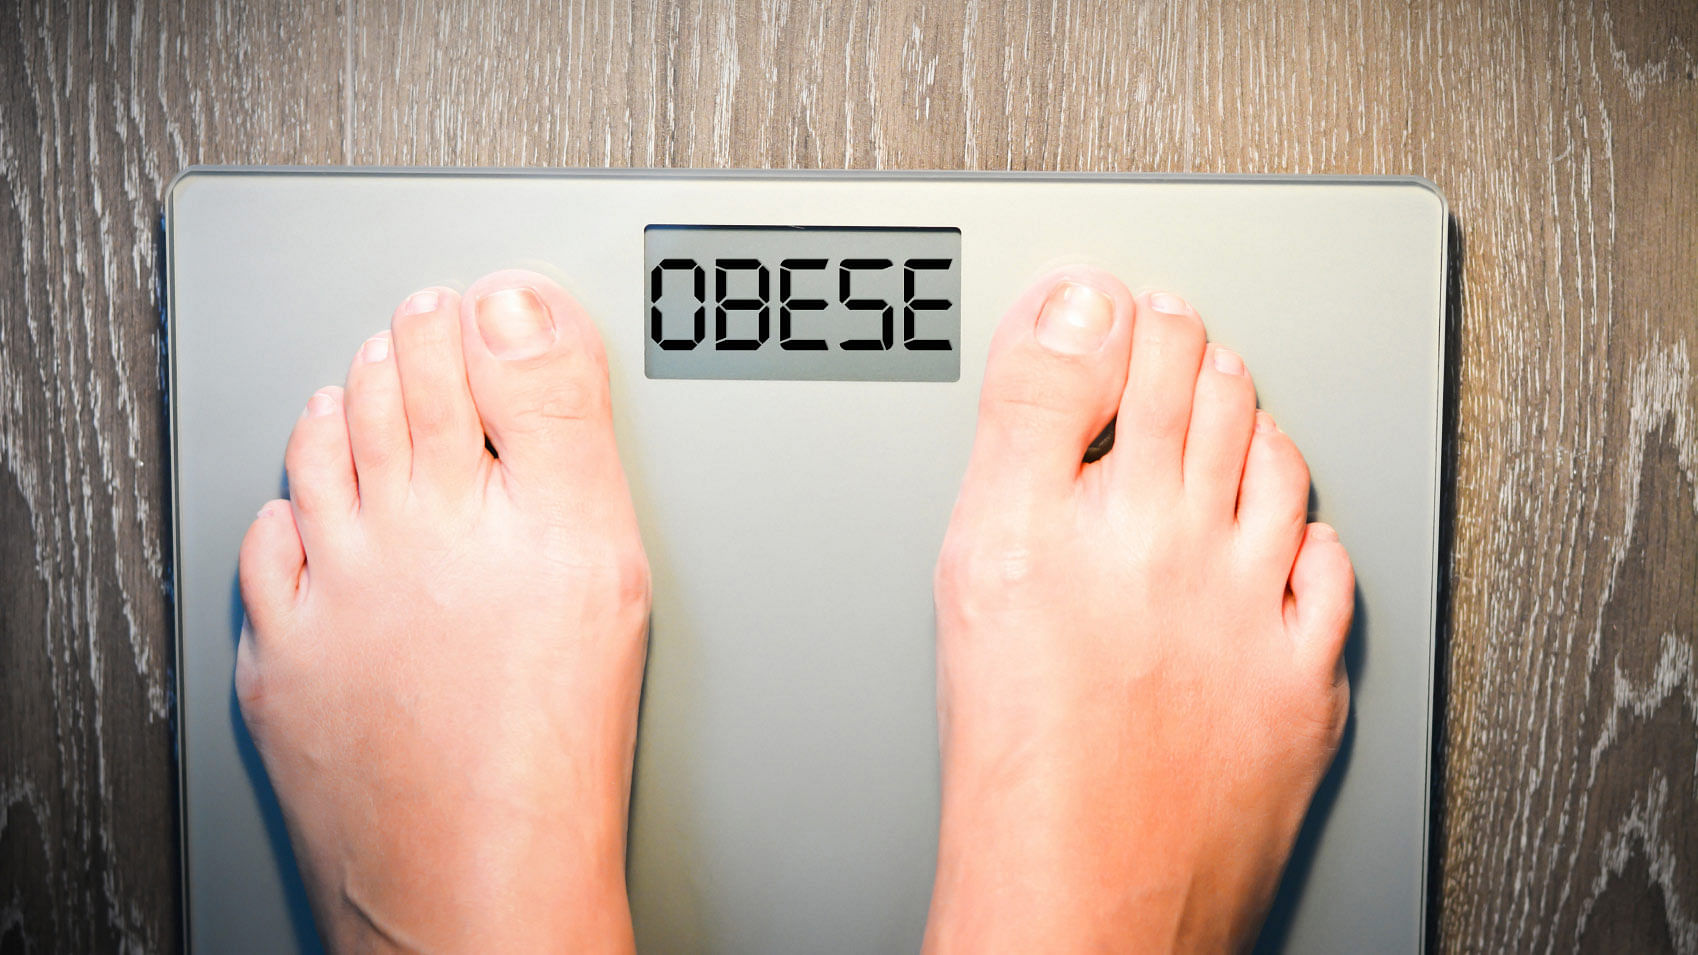 A WHO study says children in north India are more obese than the ones in south. (Photo: iStockphoto)